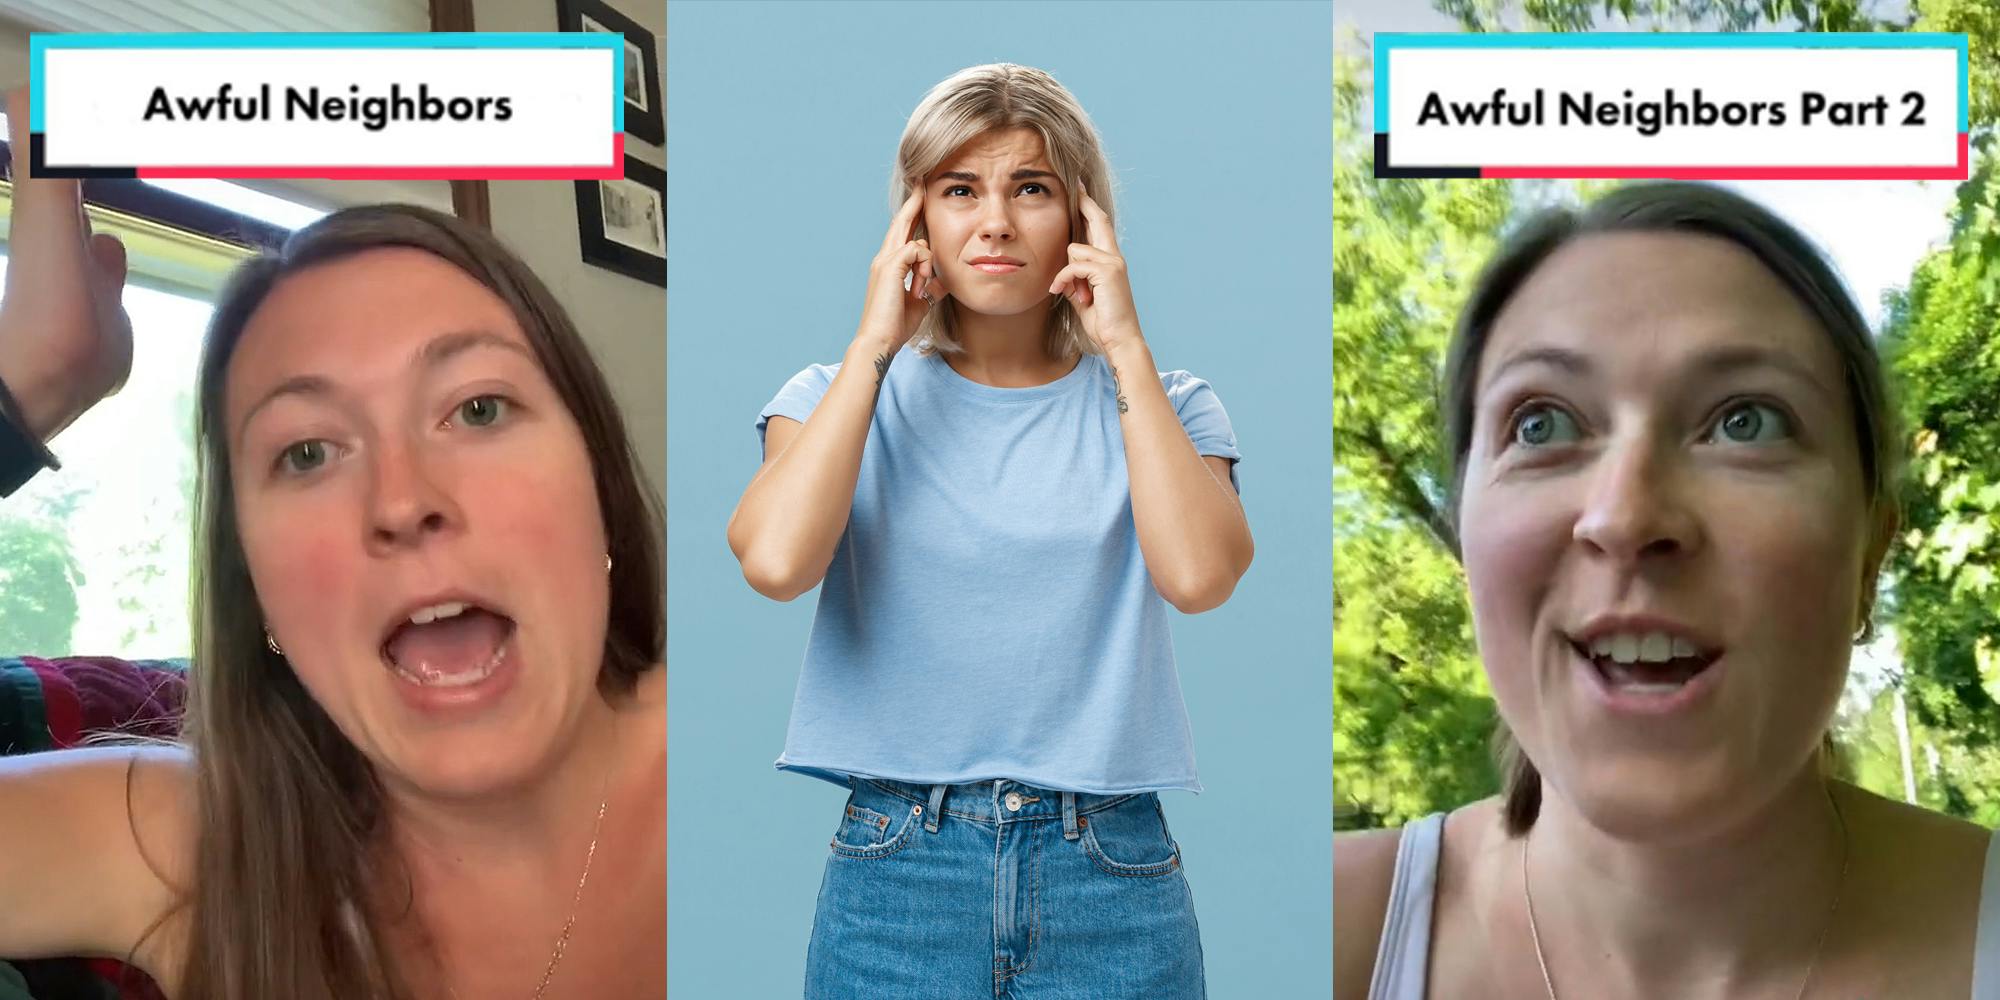 woman sitting on couch mouth open hand up caption "Awful Neighbors" (l) Woman holding ears on blue background (c) Woman outside mouth opened shocked caption "Awful Neighbors Part 2" (r)